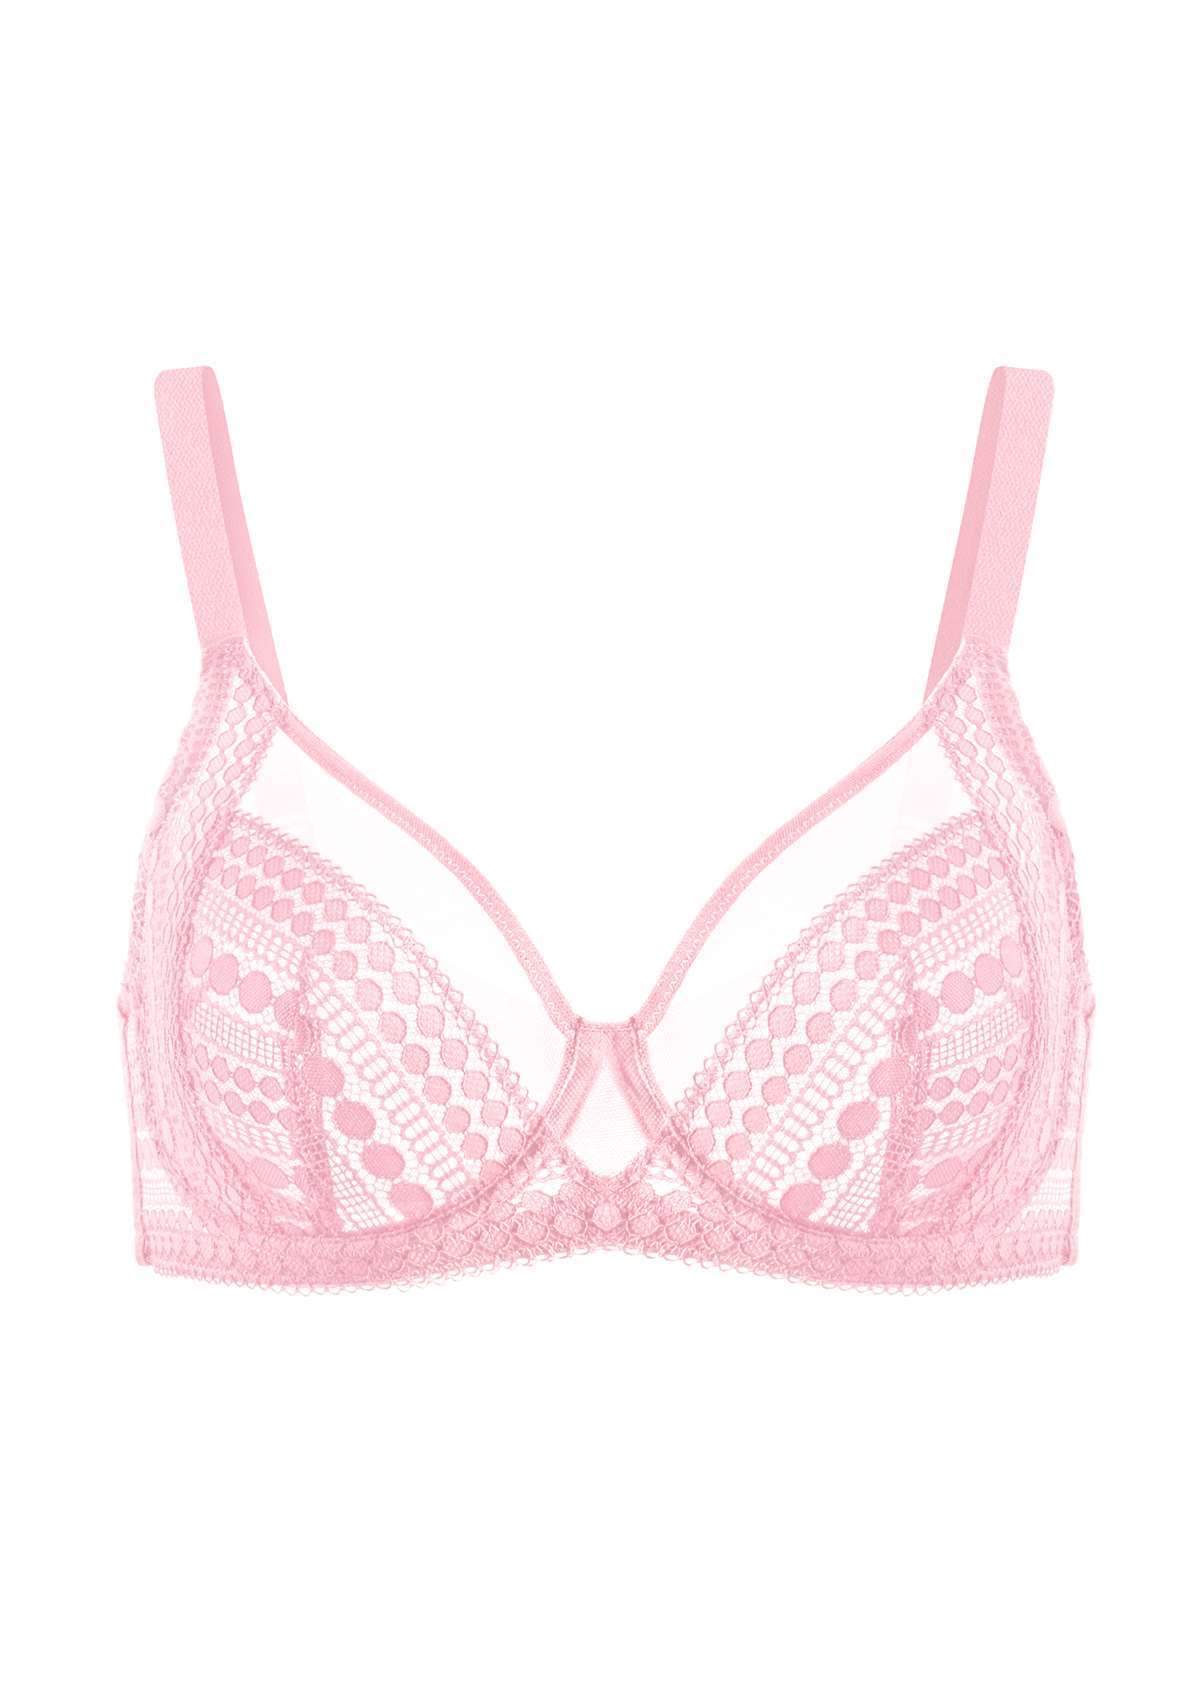 HSIA Heroine Lace Bra And Panties Set: Most Comfortable Supportive Bra - Pink / 34 / DDD/F